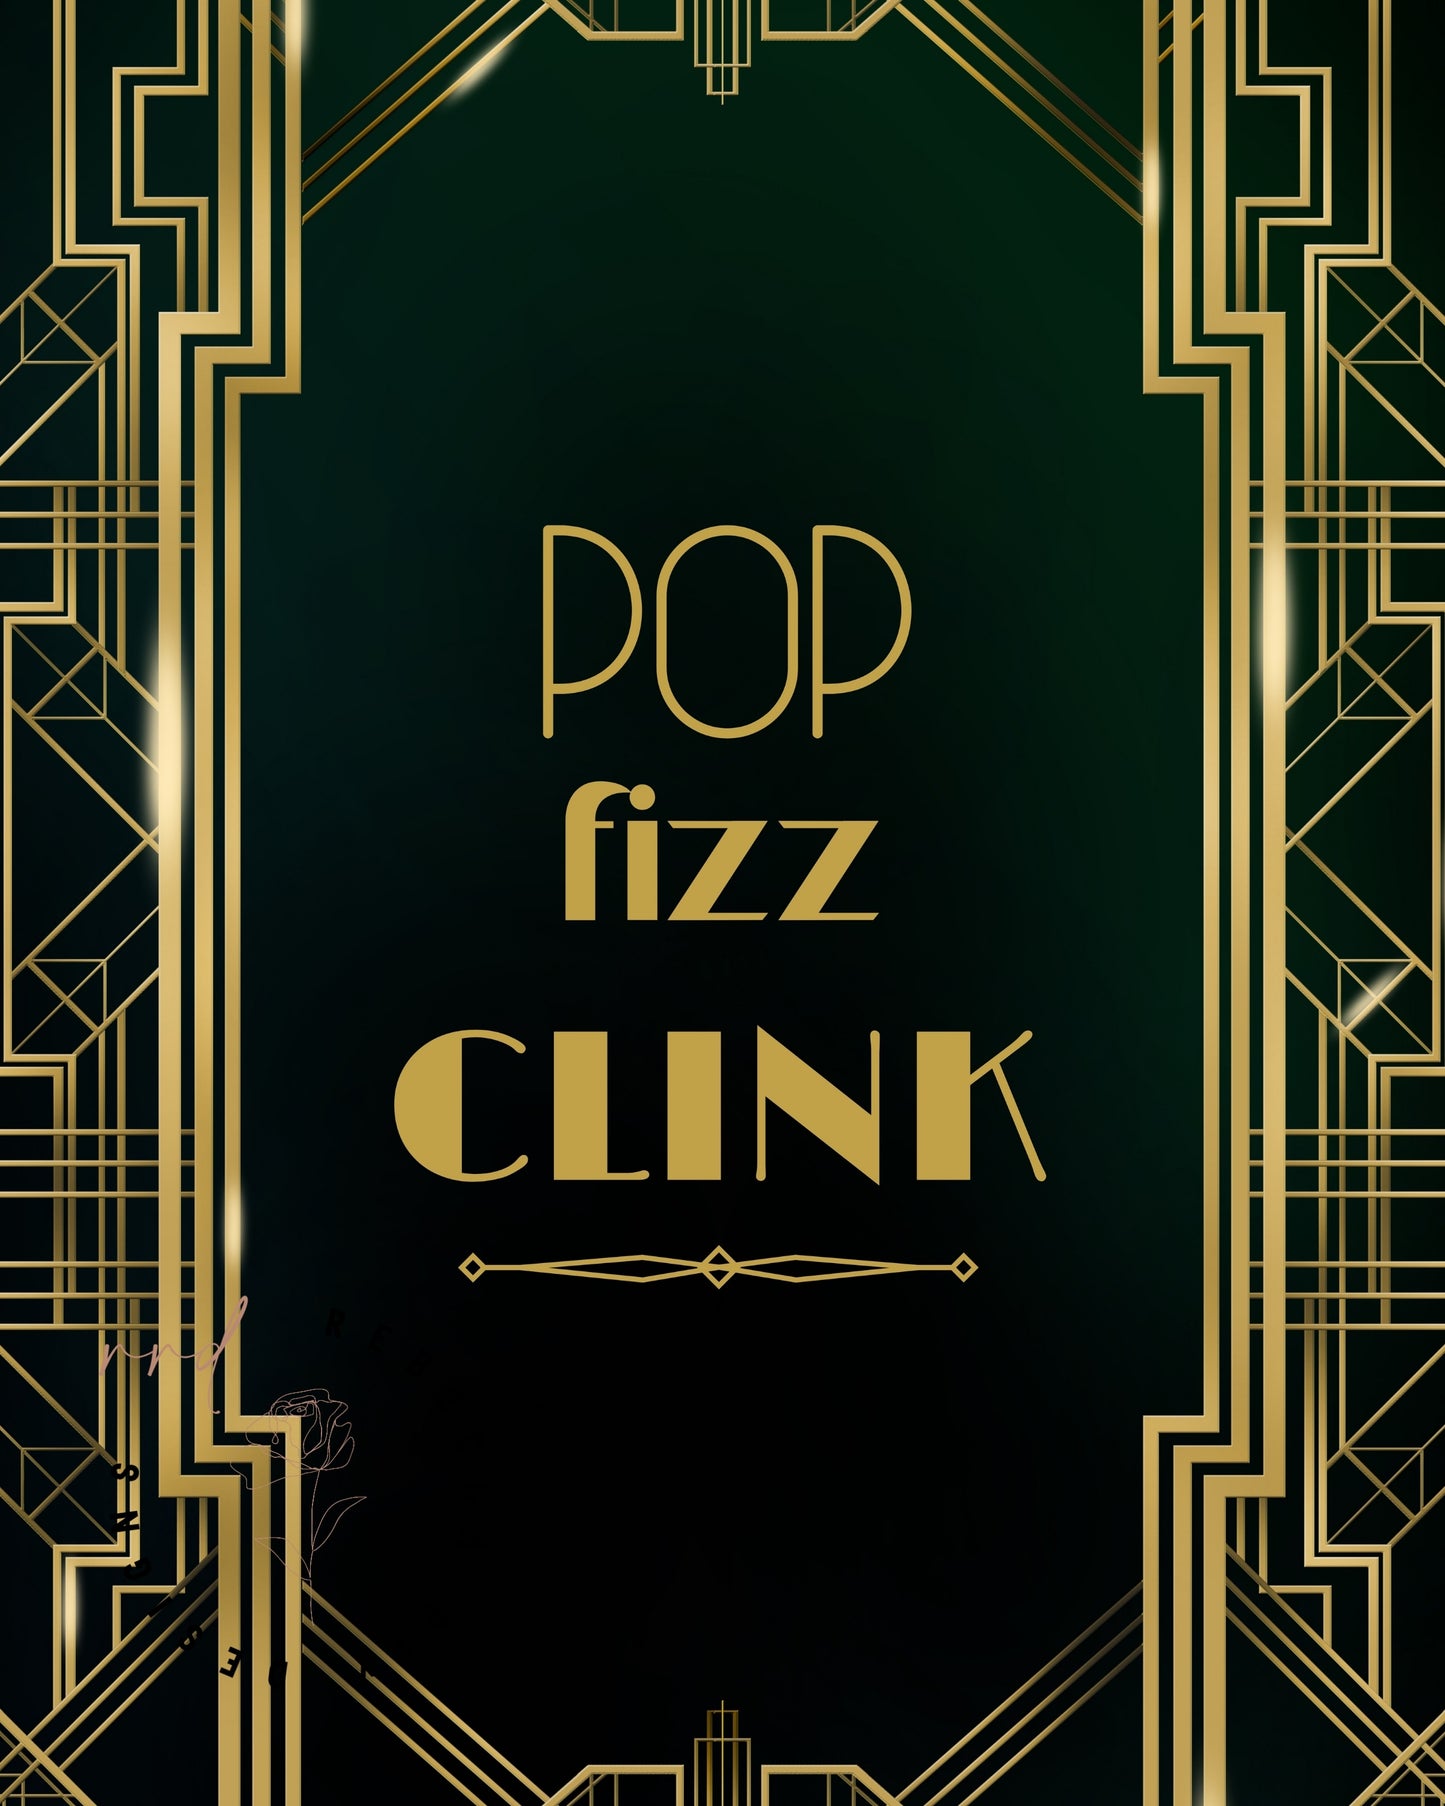 "Pop Fizz Clink" Art Deco Printable Party Sign For Great Gatsby or Roaring 20's Party Or Wedding, Black & Gold, Printable Party Decor